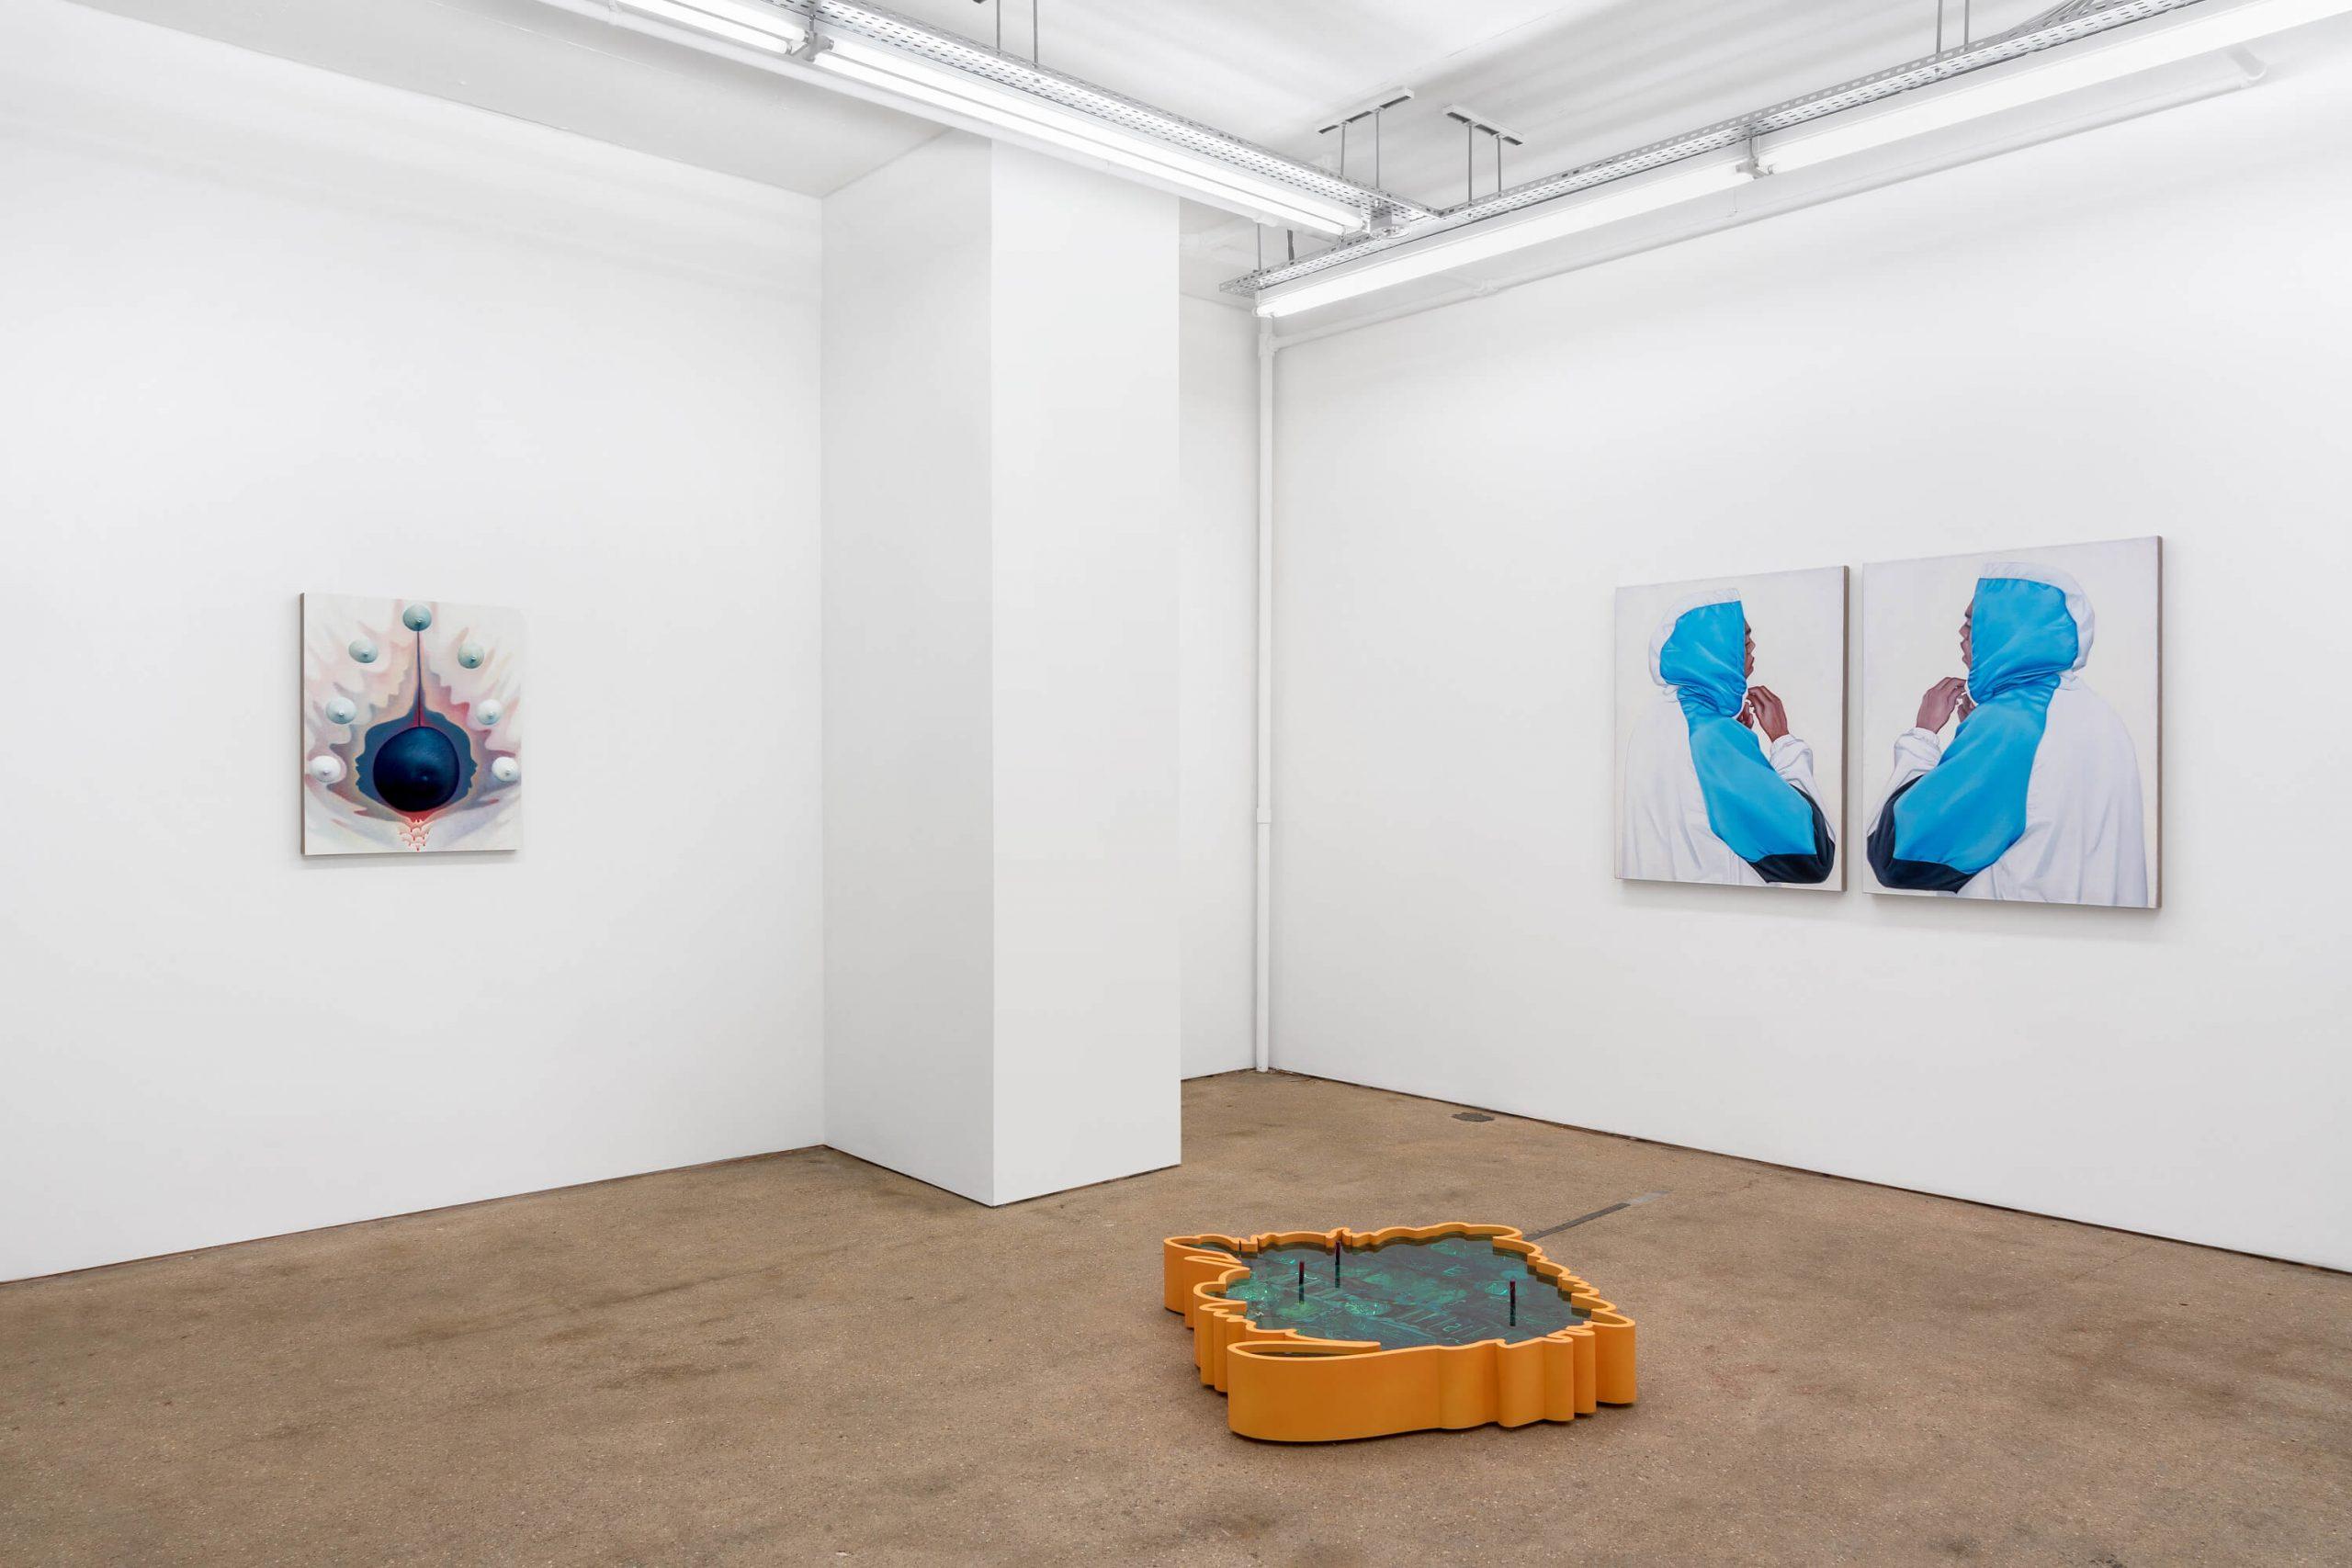 Now I am a lake: Curated by Rose Nestler, Installation view, Public Gallery, London, 2022